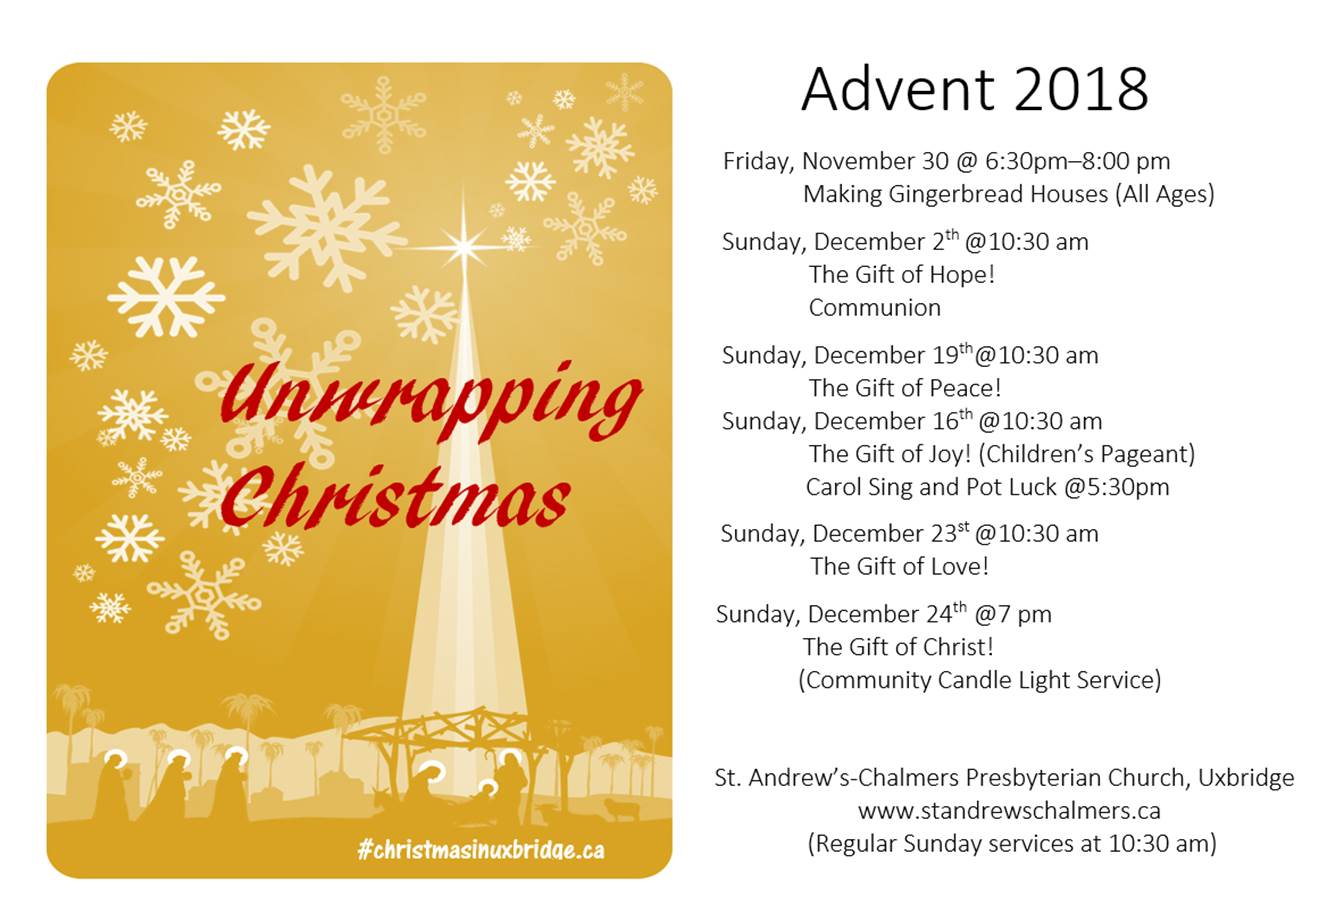 Christmas Services at St. Andrew's-Chalmers Presbyterian